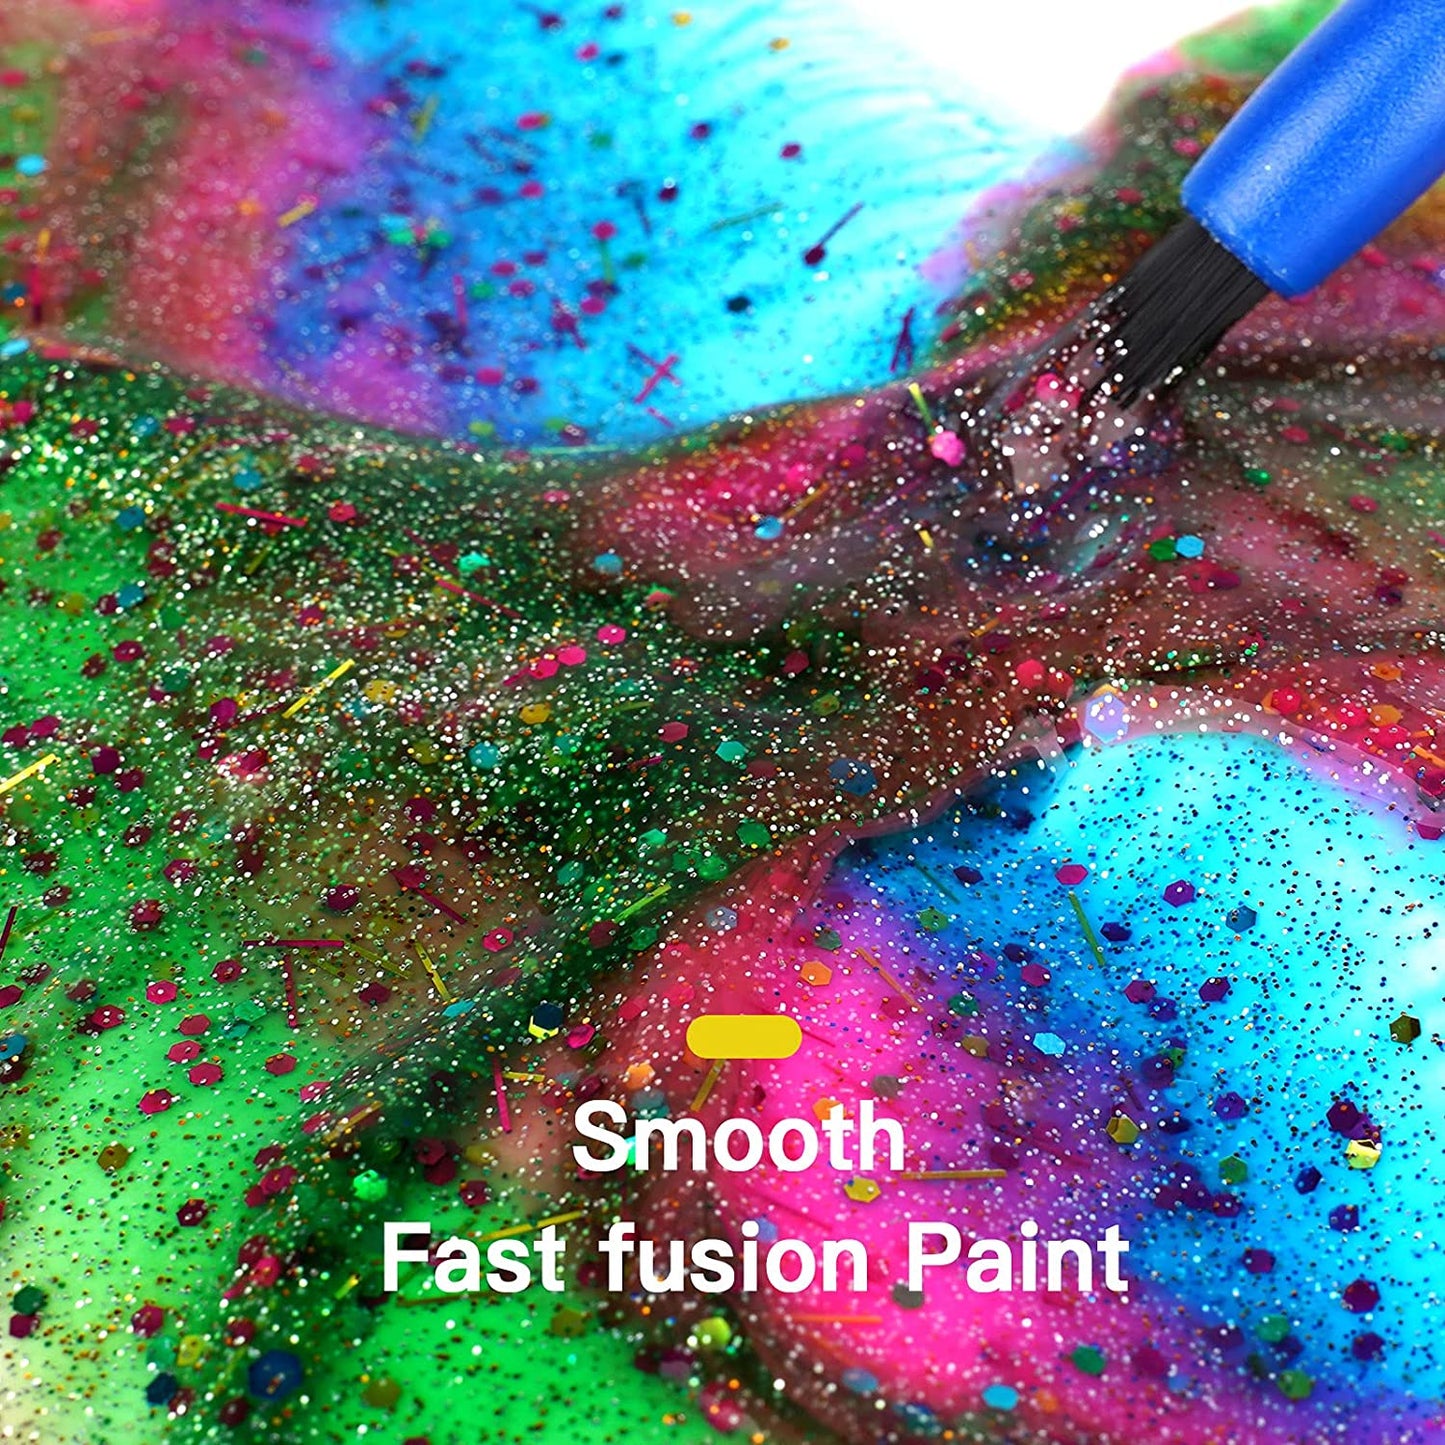 The TBC washable sparkle Tempera paint is a smooth, fast fusion paint - Stationery Island